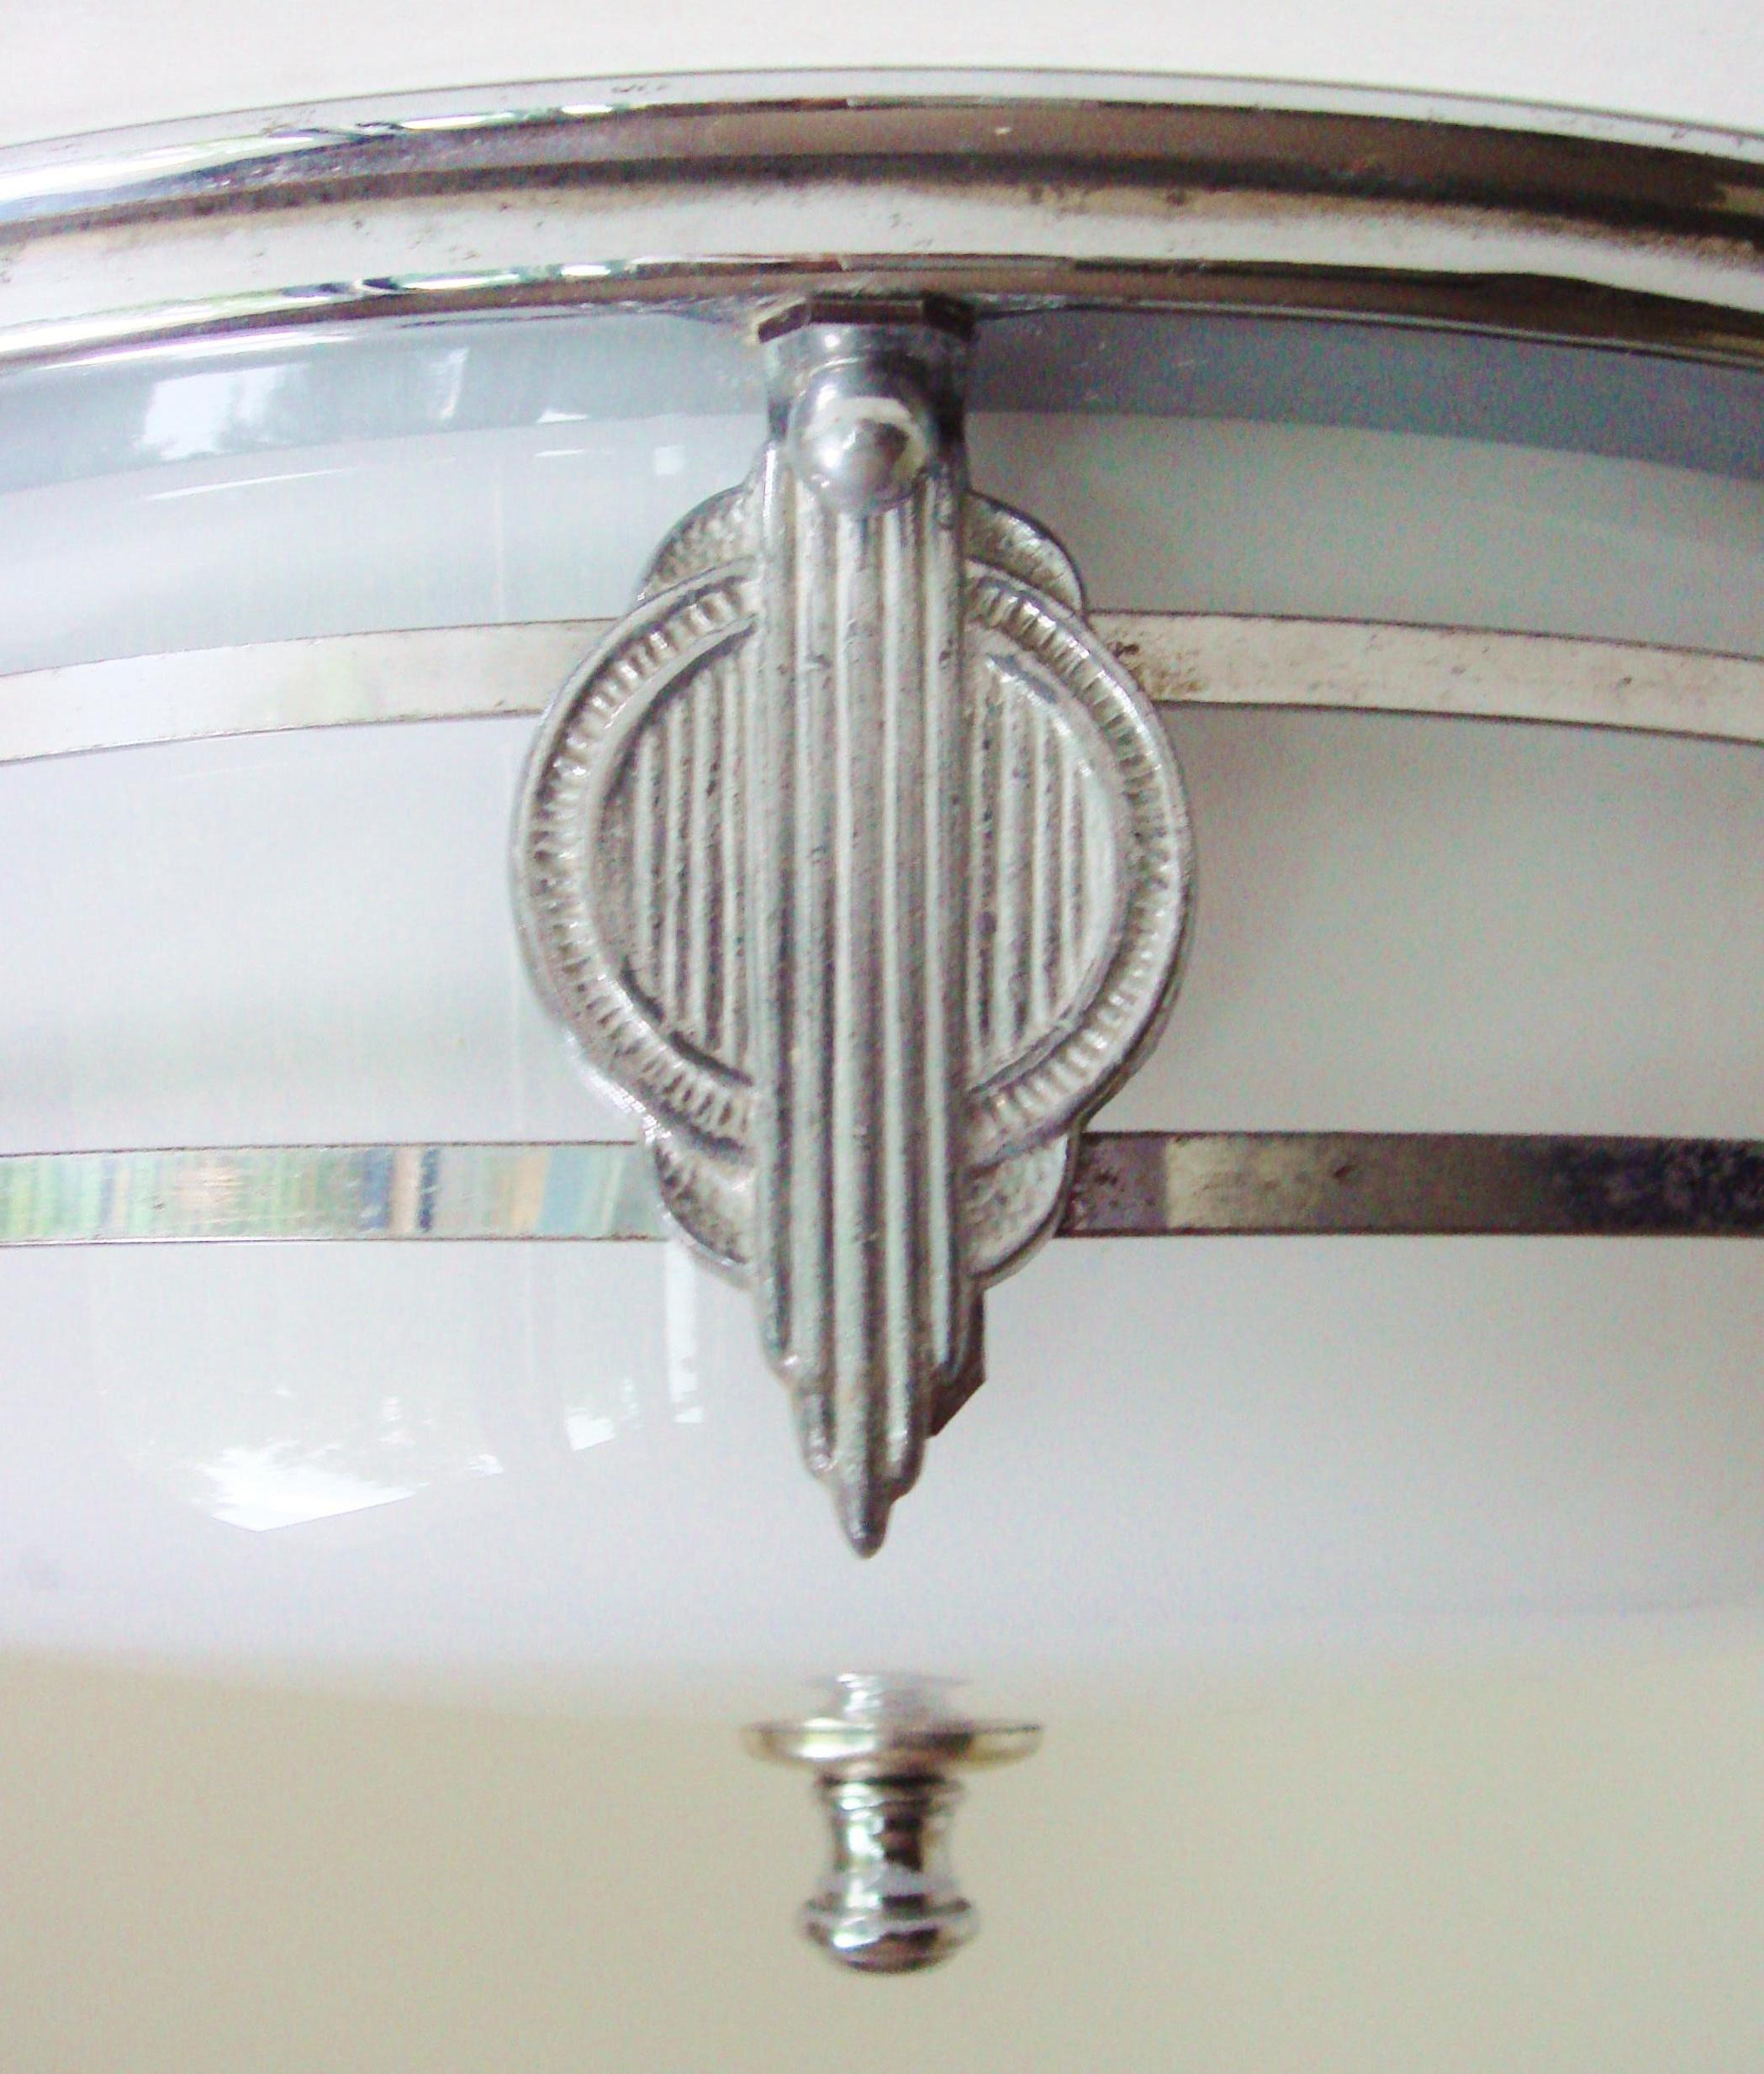 Molded American Art Deco Flush Mount Ceiling Lamp with Decorative Chrome Cage & Finial